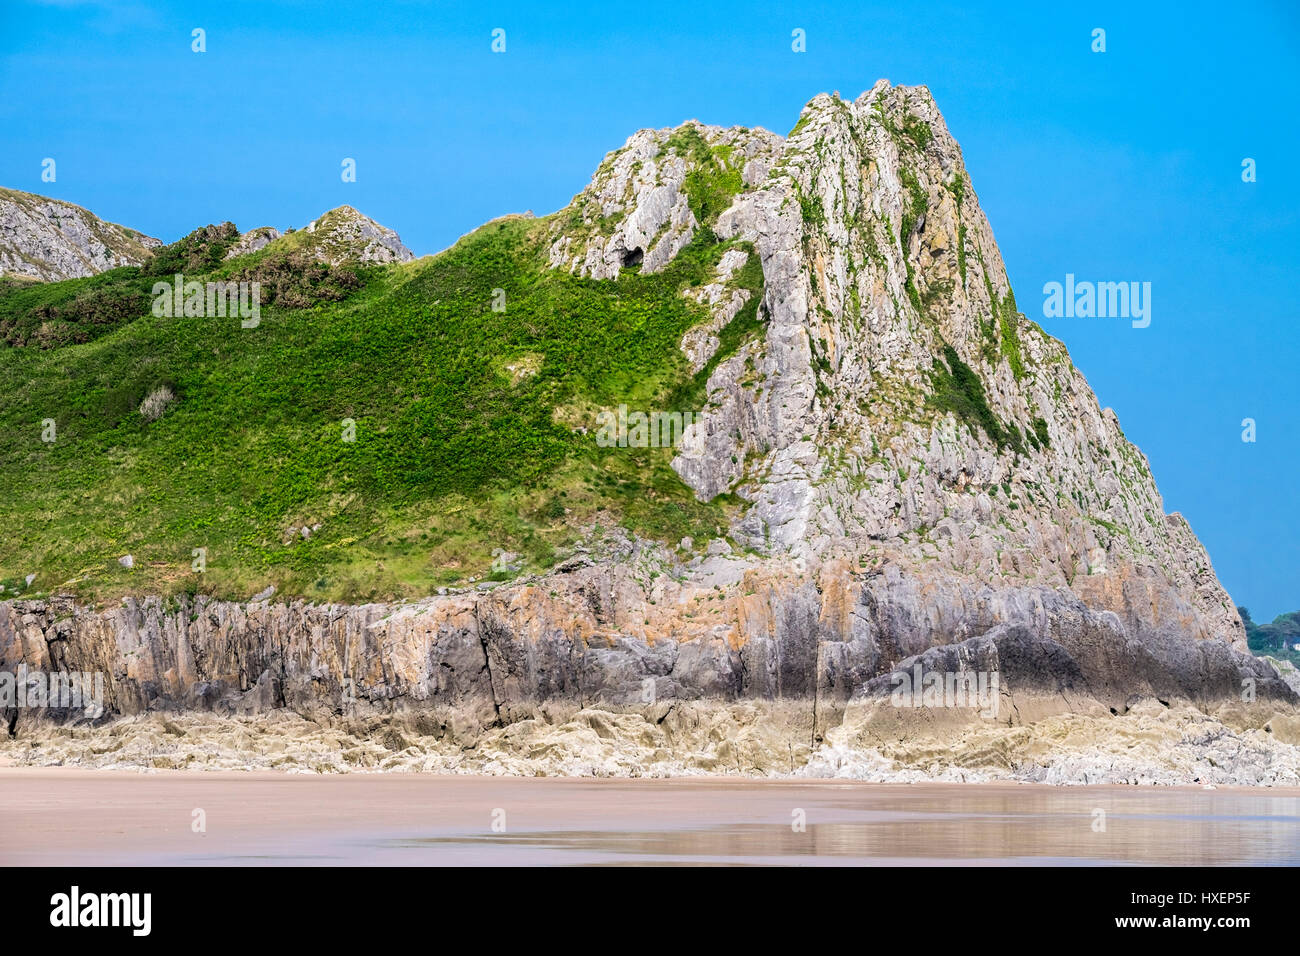 Great Tor in Oxwich Bay, Gower Peninsula, South Wales (UK), a popular place for local rock climbers. Stock Photo